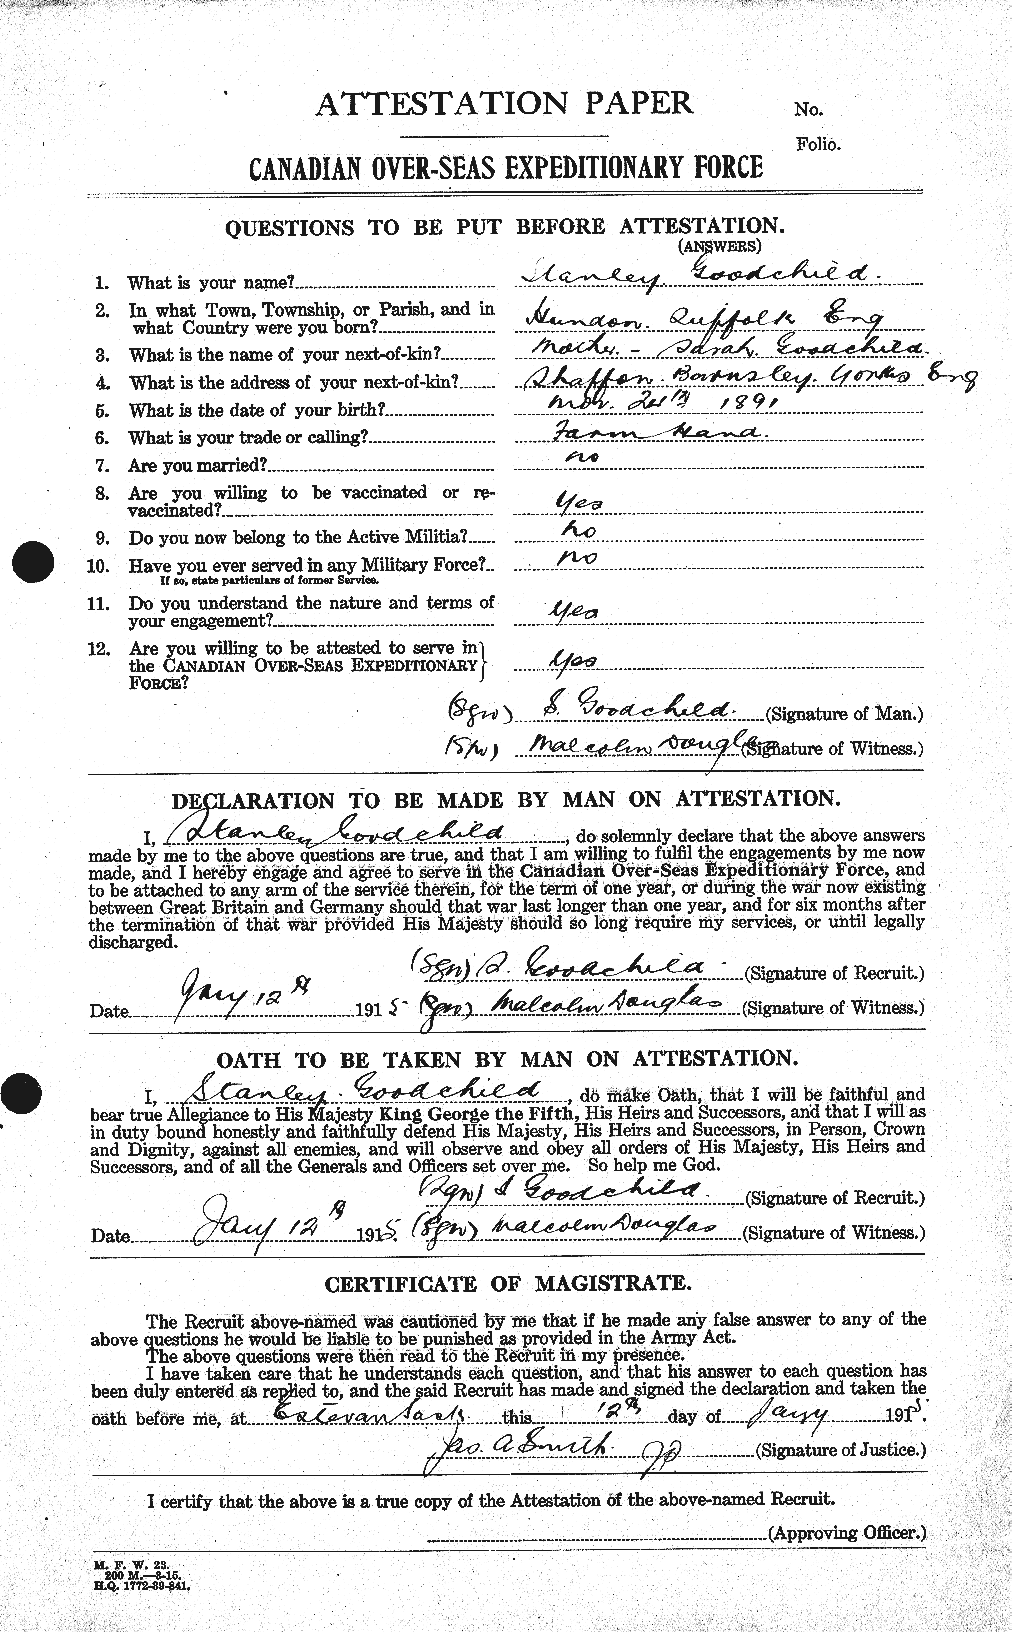 Personnel Records of the First World War - CEF 353315a